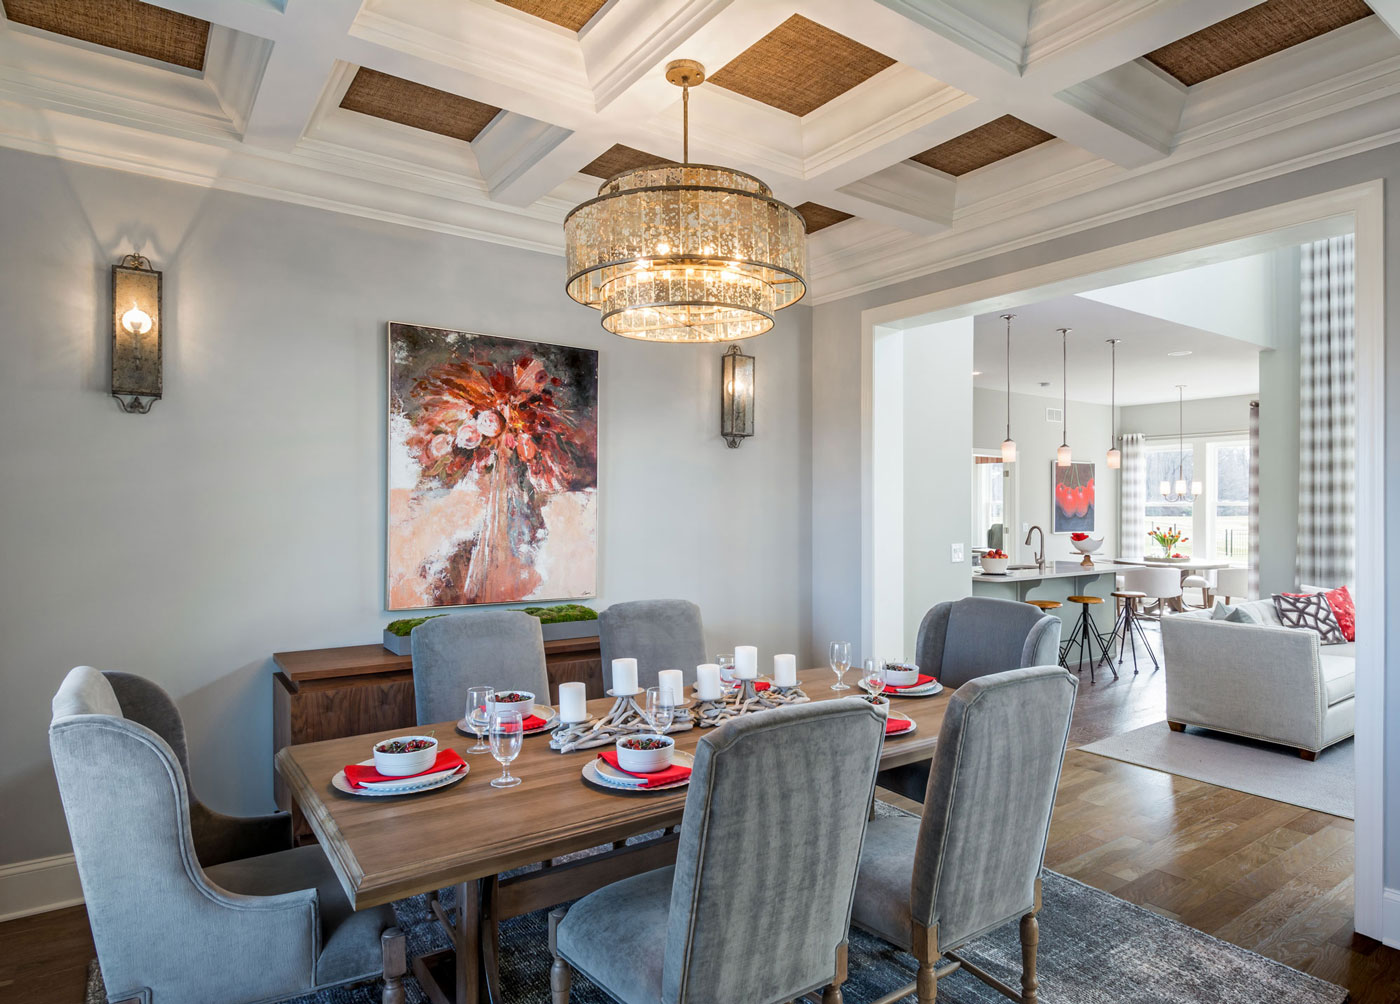 Elegant dining area in model home with dramatic coffered ceiling and open floor plan designed for 55+ home buyer in Delaware.